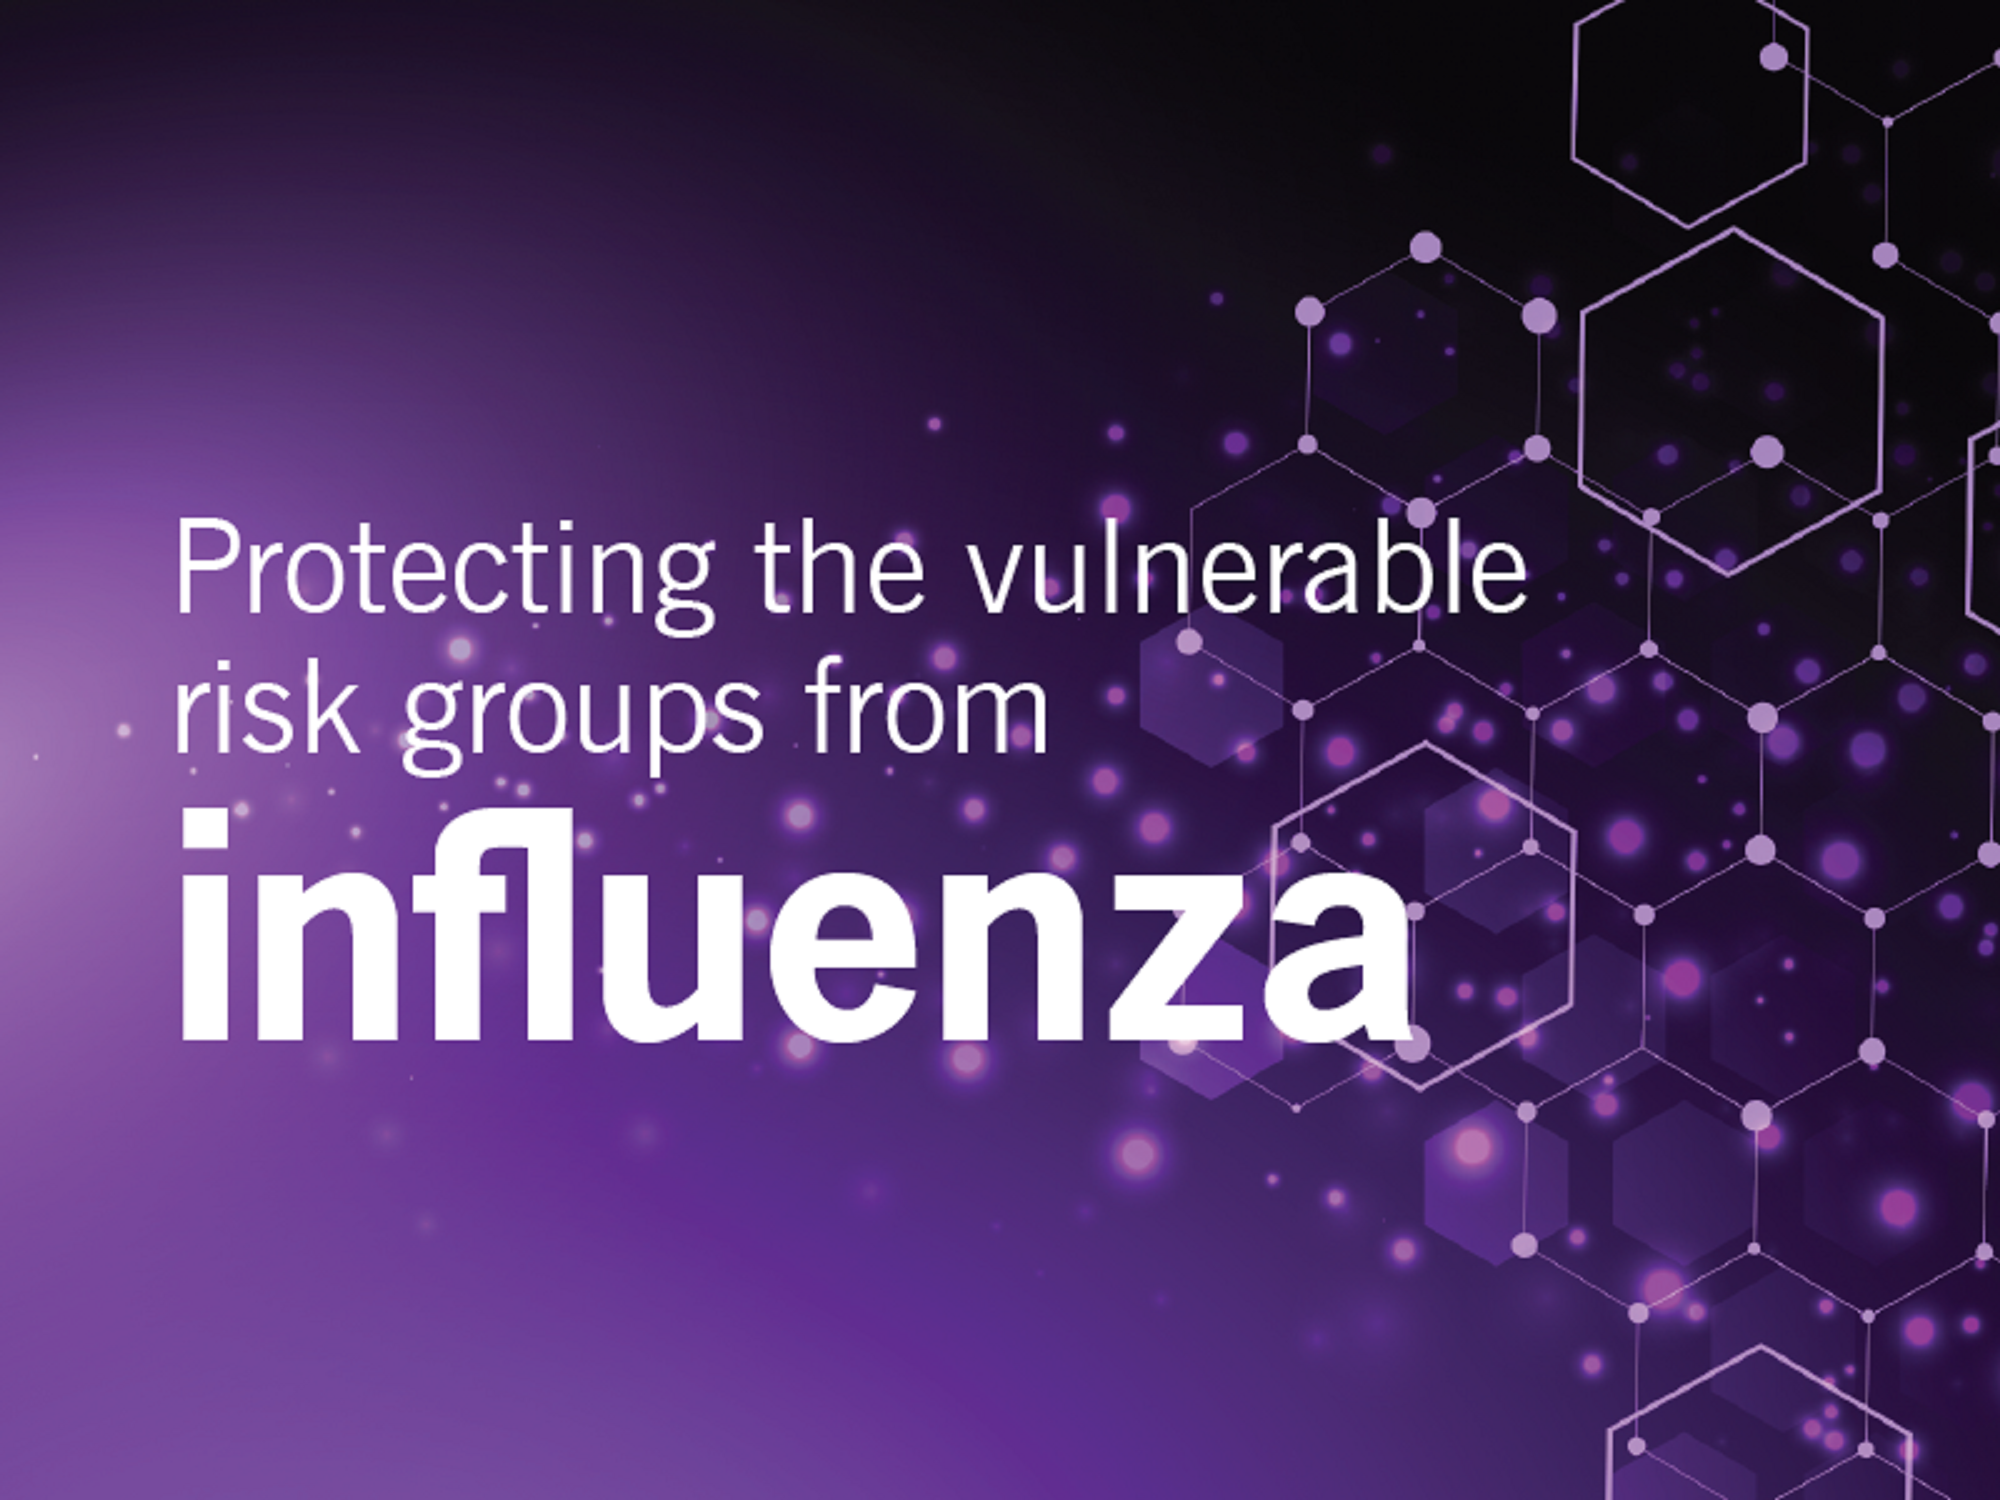 CPDE45642: Protecting the vulnerable risk groups from influenza course image